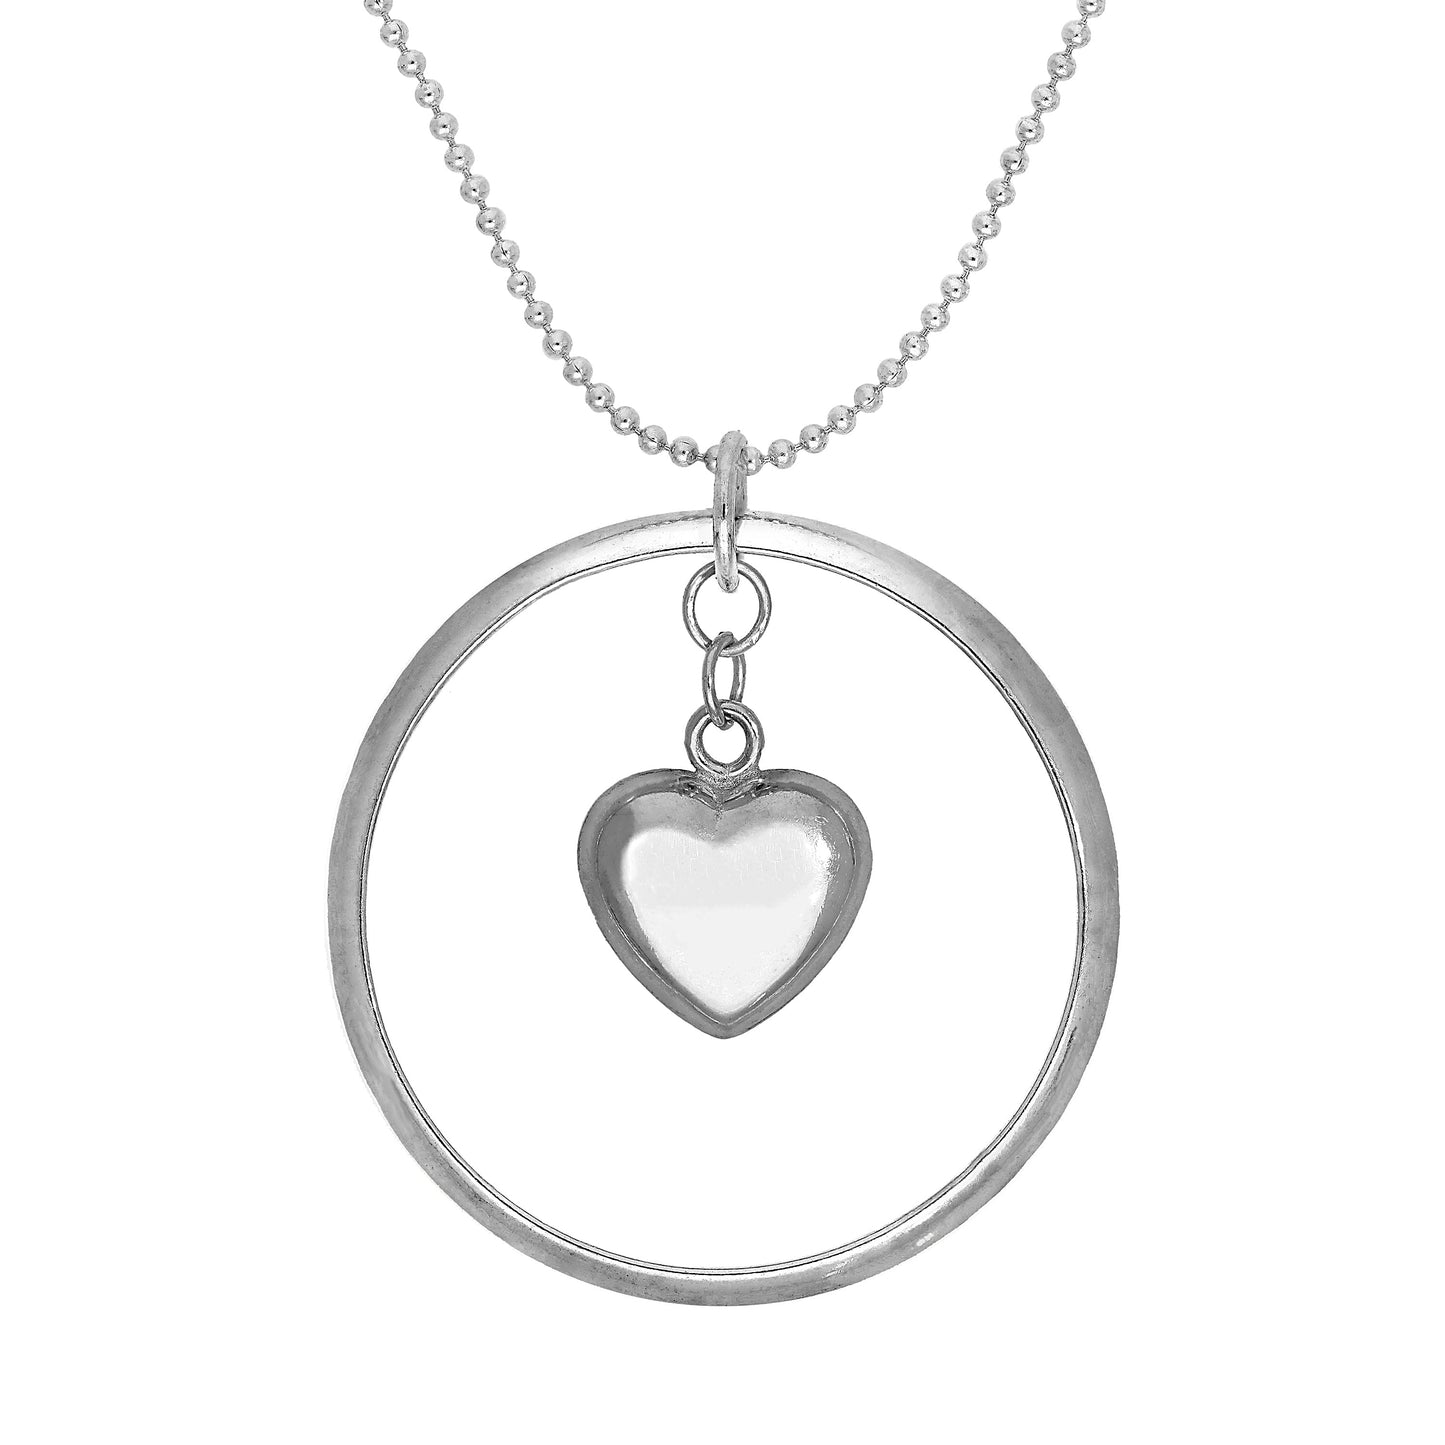 Sterling Silver Karma Moments Puffed Heart Pendant on Bead Chain Necklace